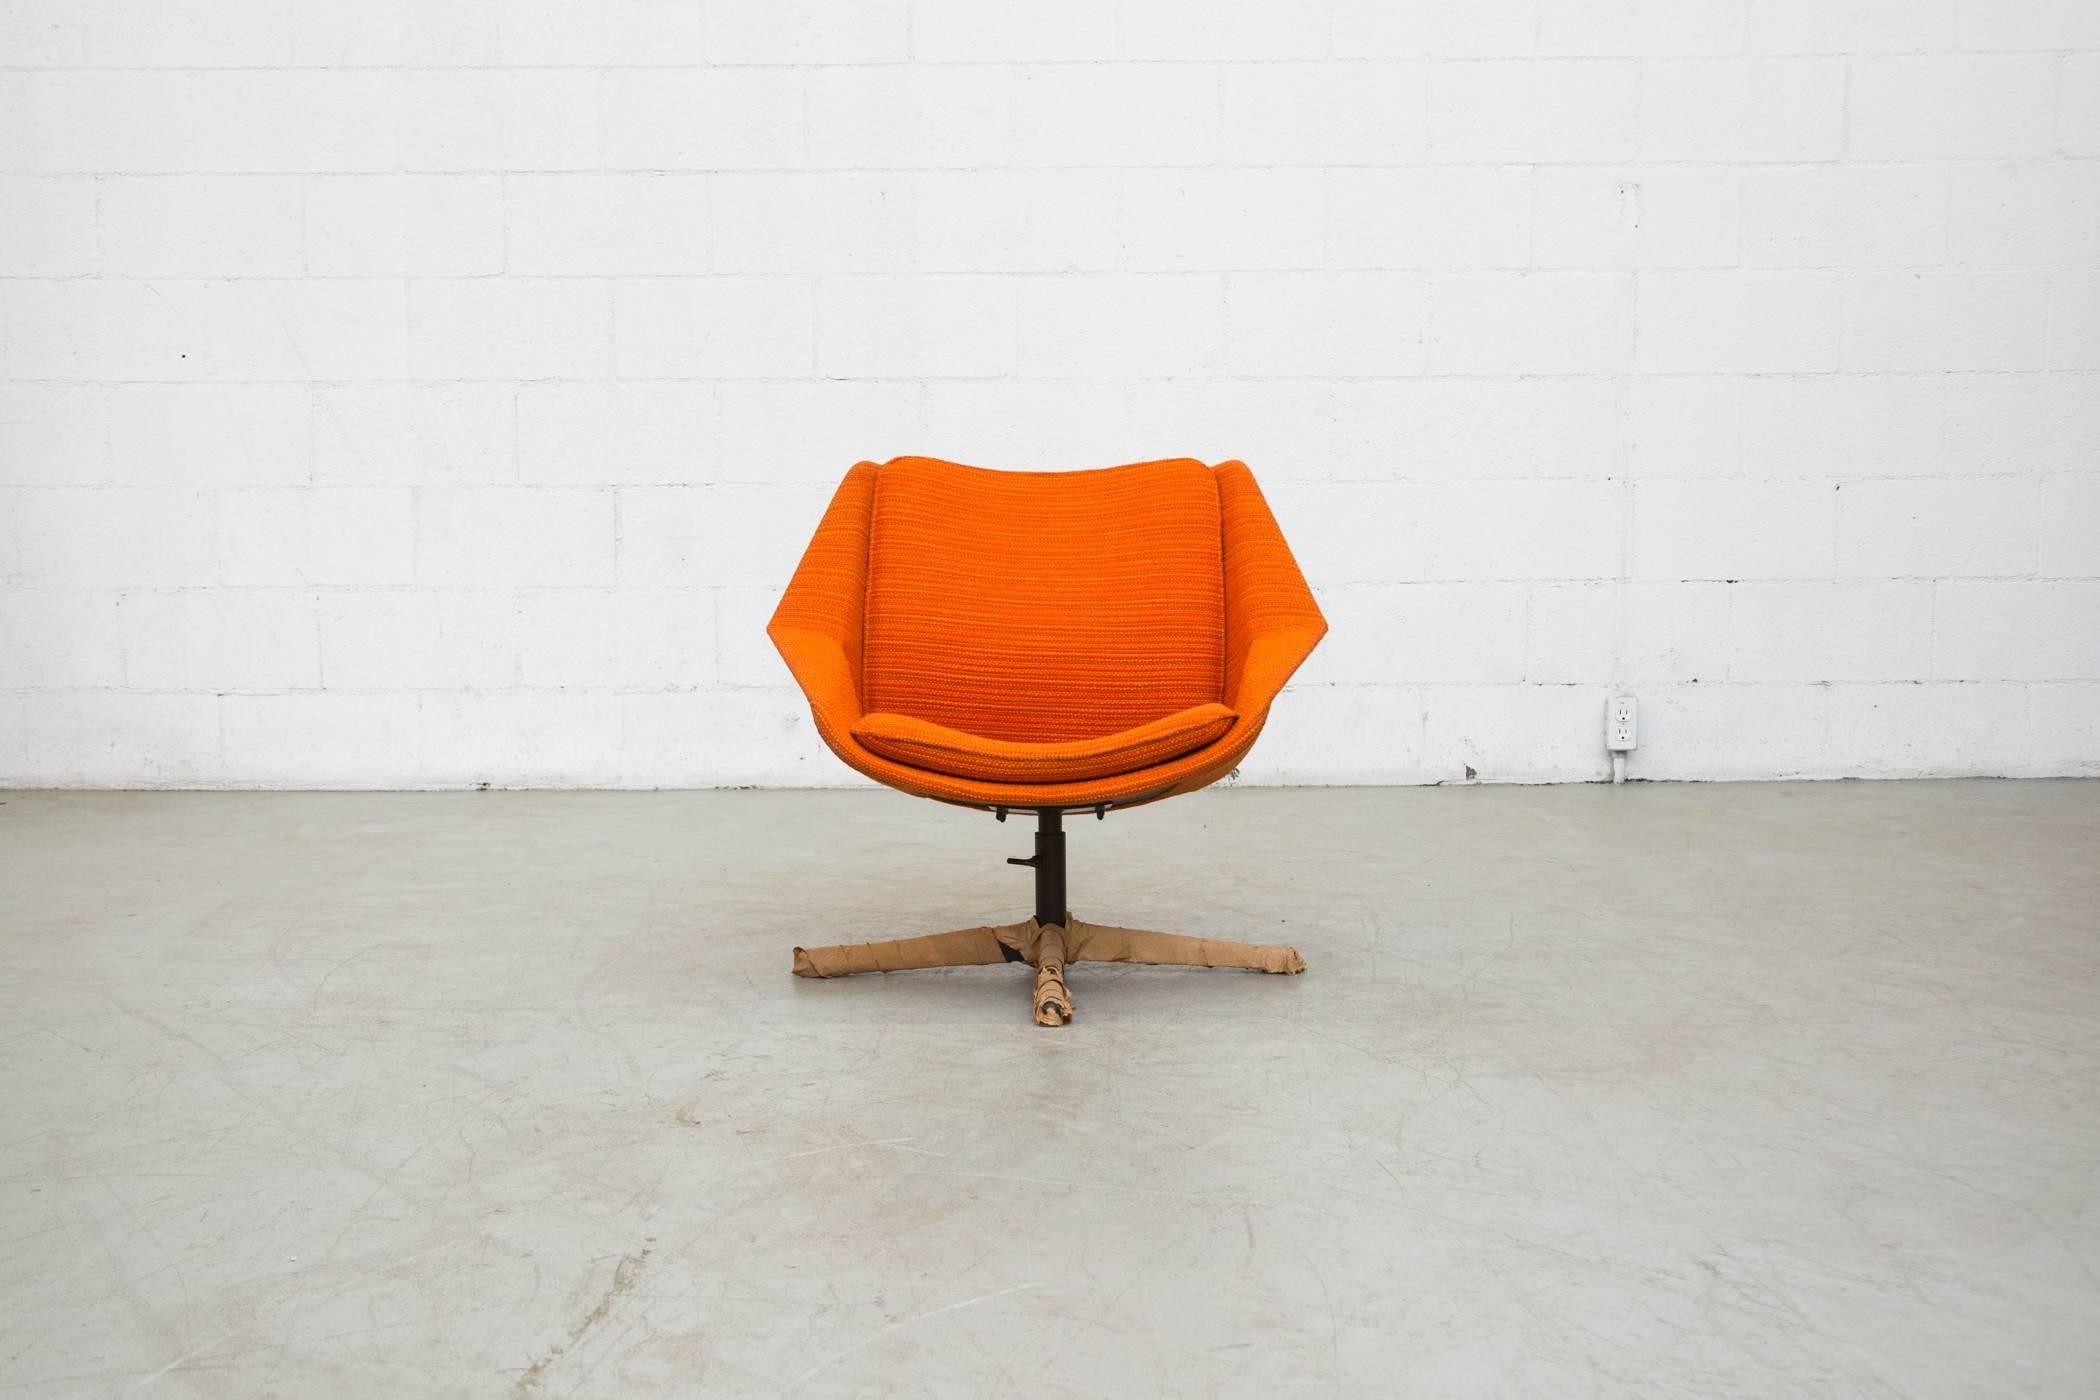 Electric orange Pastoe swivel lounge chair with original factory wrappings and box. Never used.